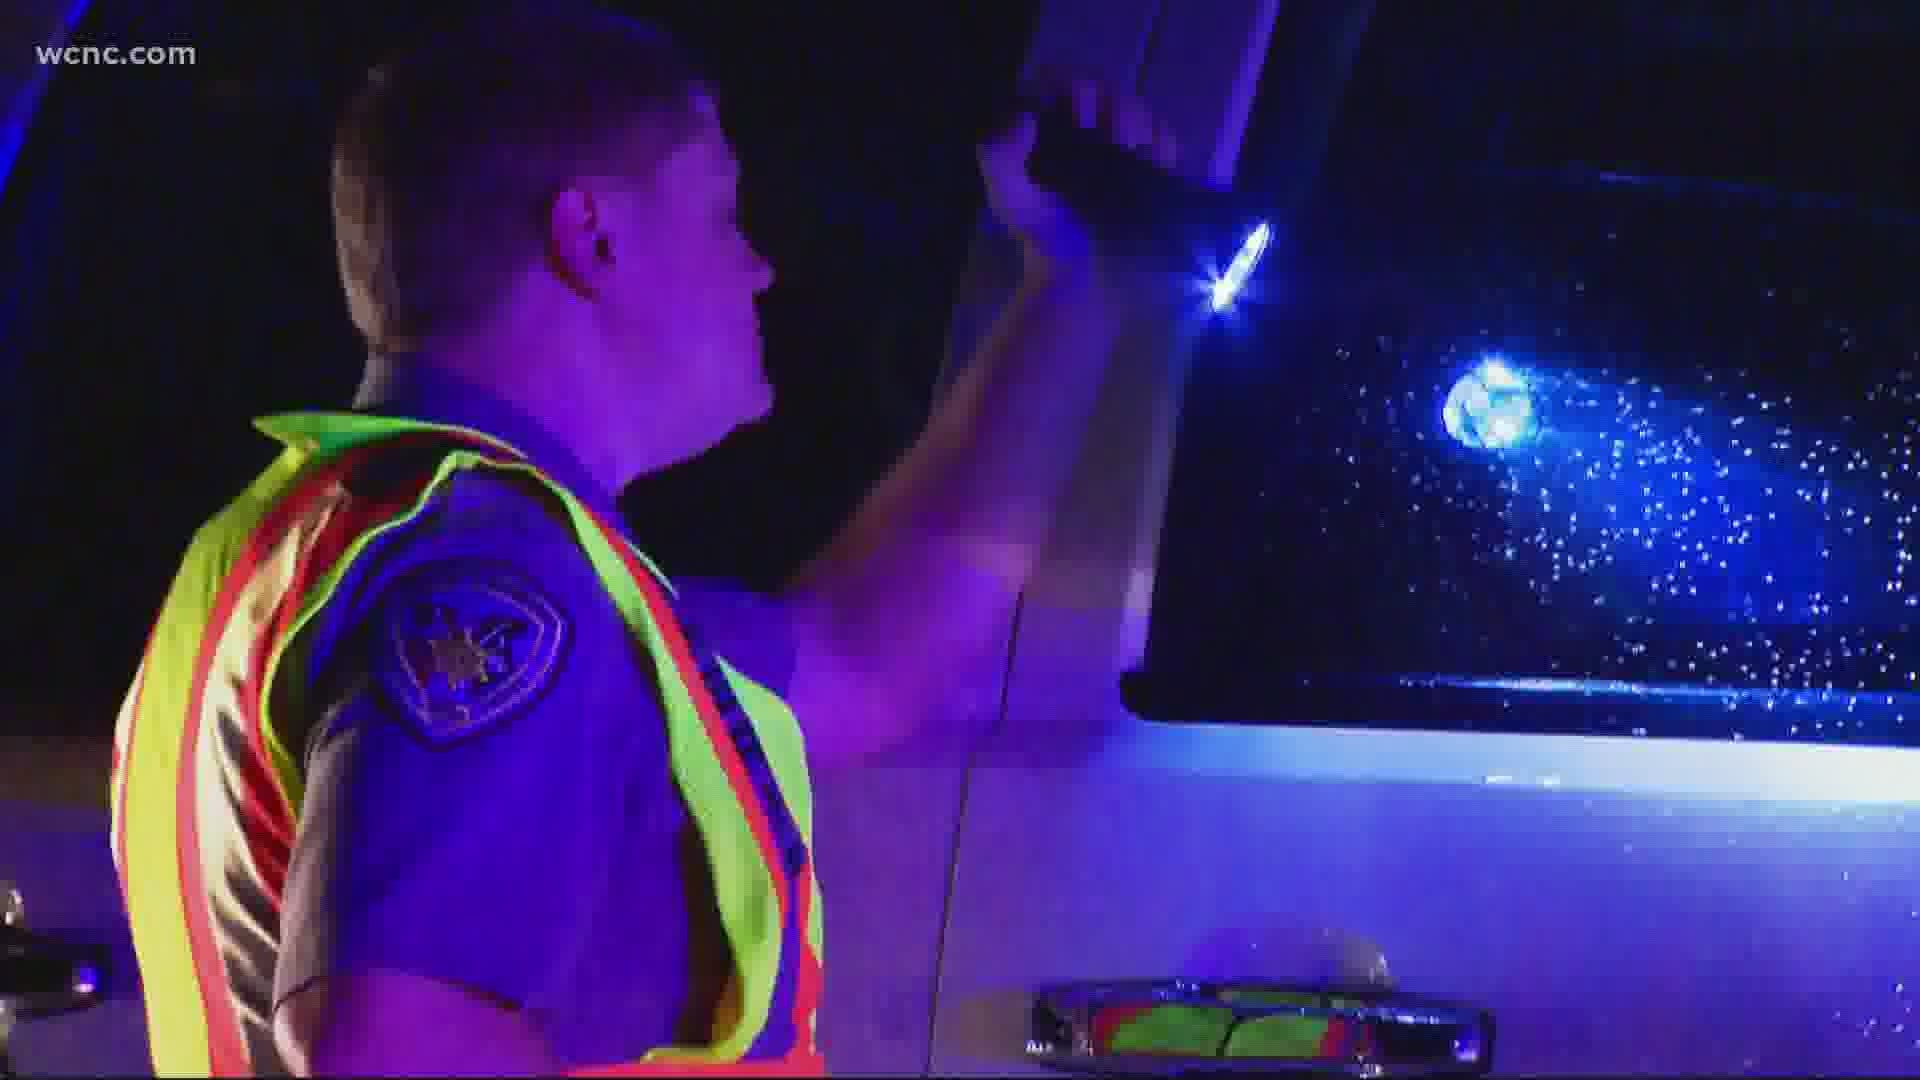 State troopers say they will be focused on speeding and impaired drivers.